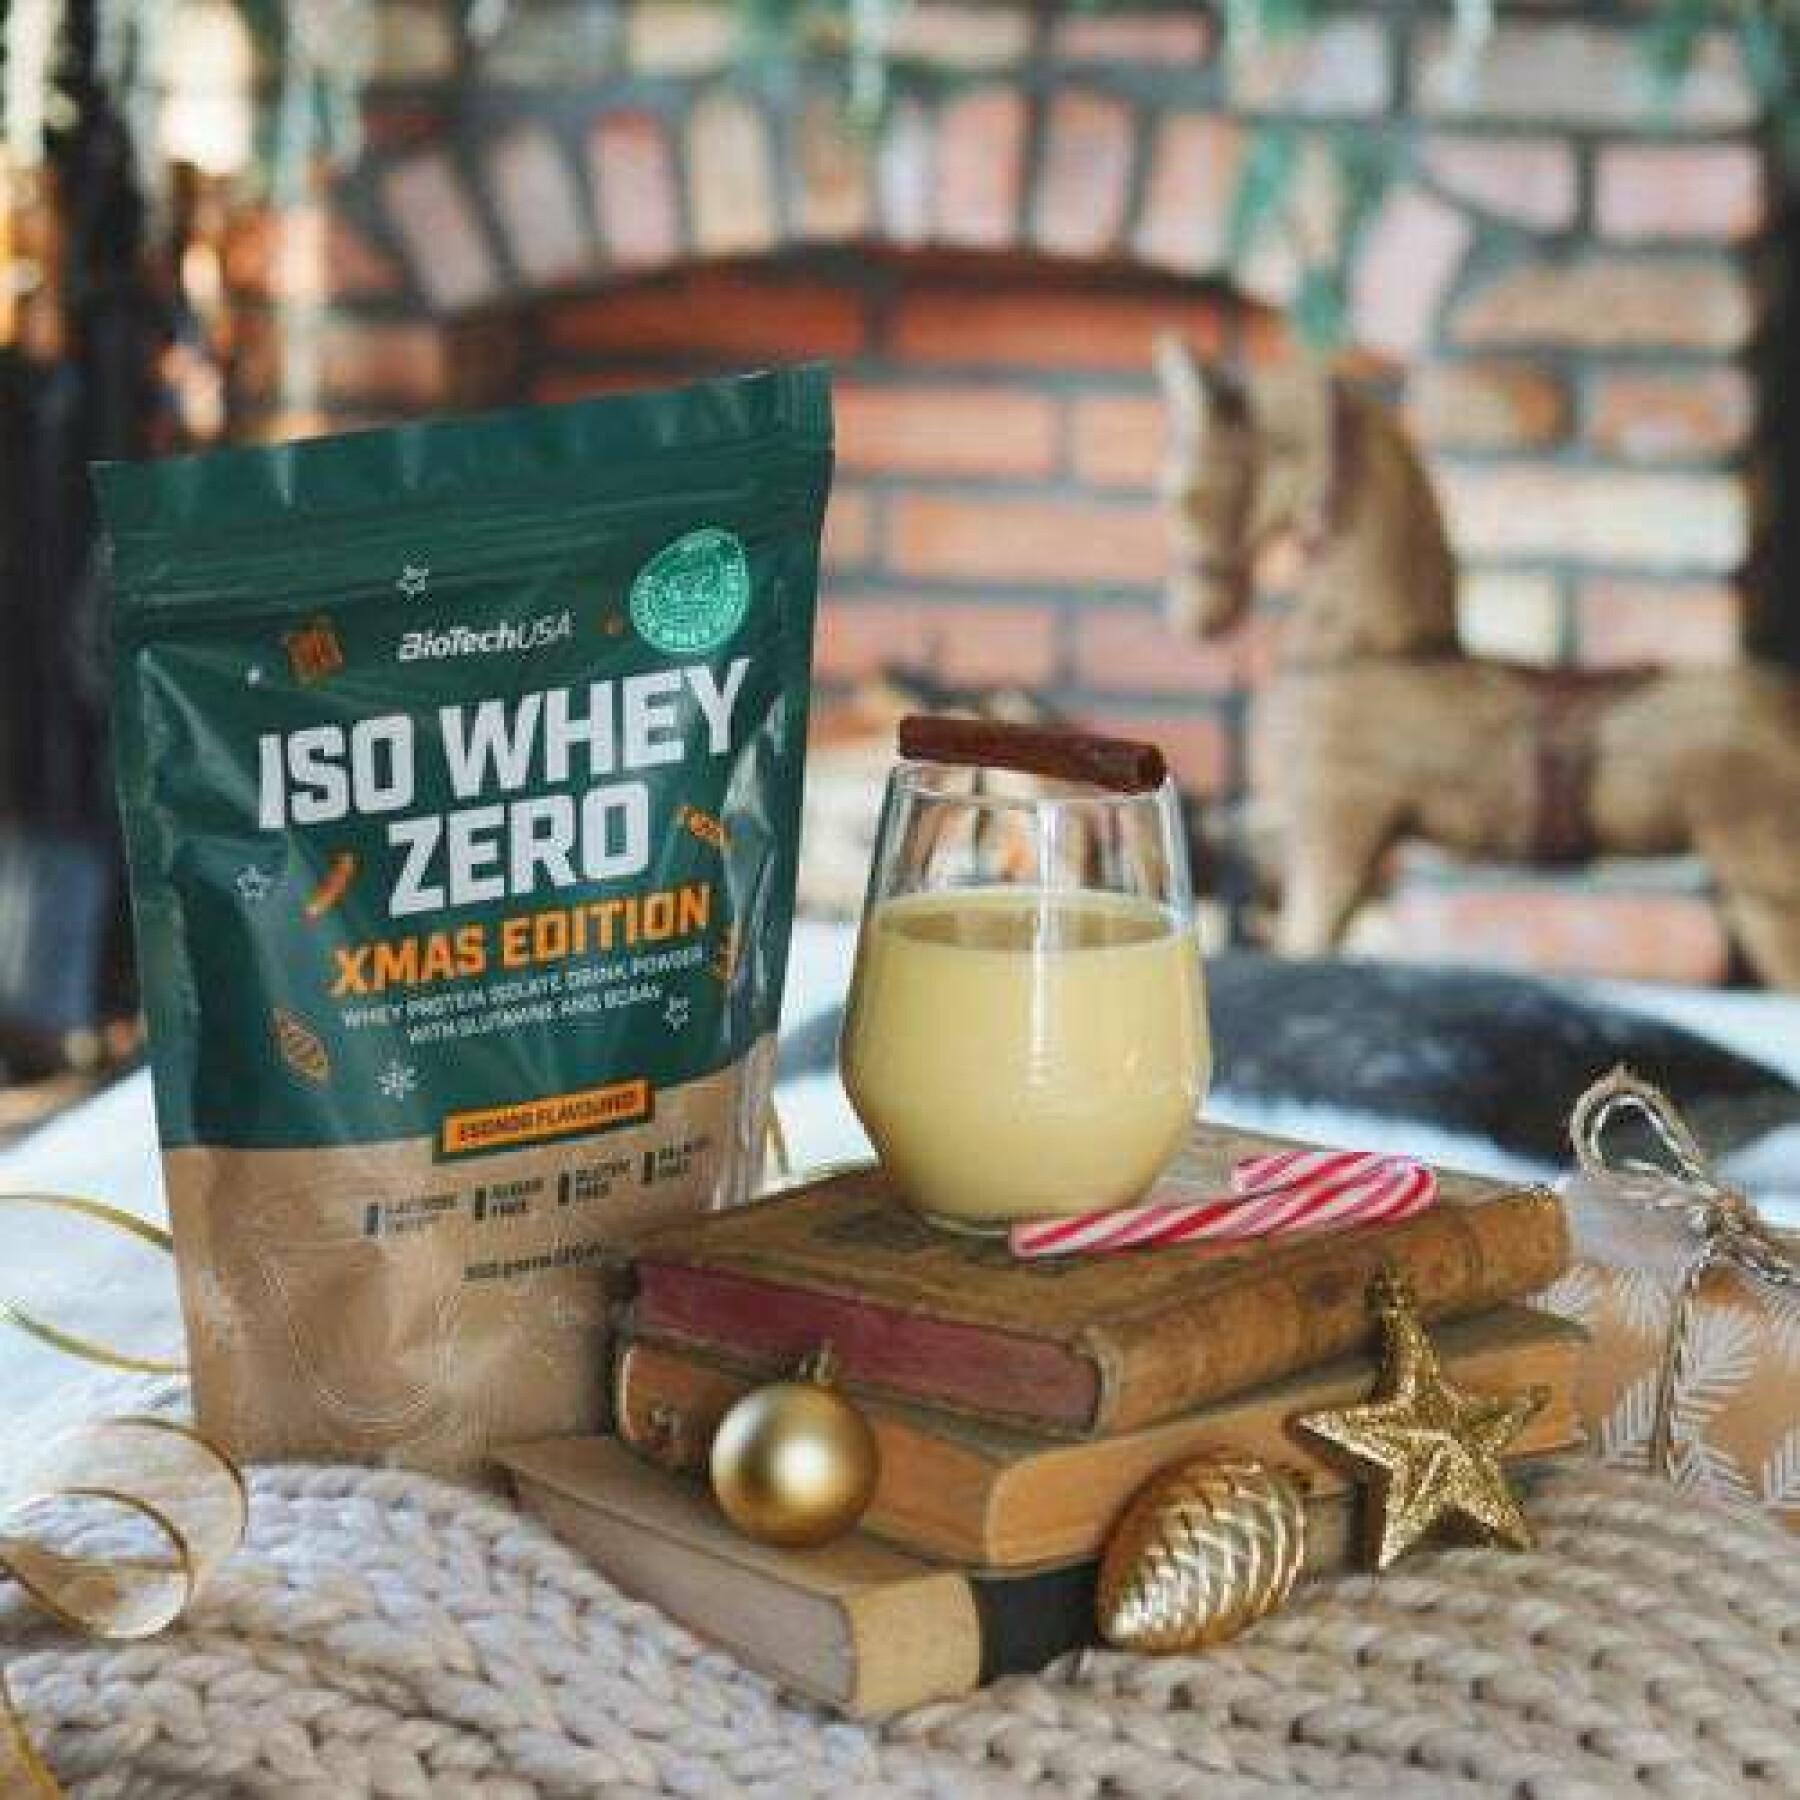 Pack of 10 bags of protein Biotech USA iso whey zero lactose free - Popcorn - 500g